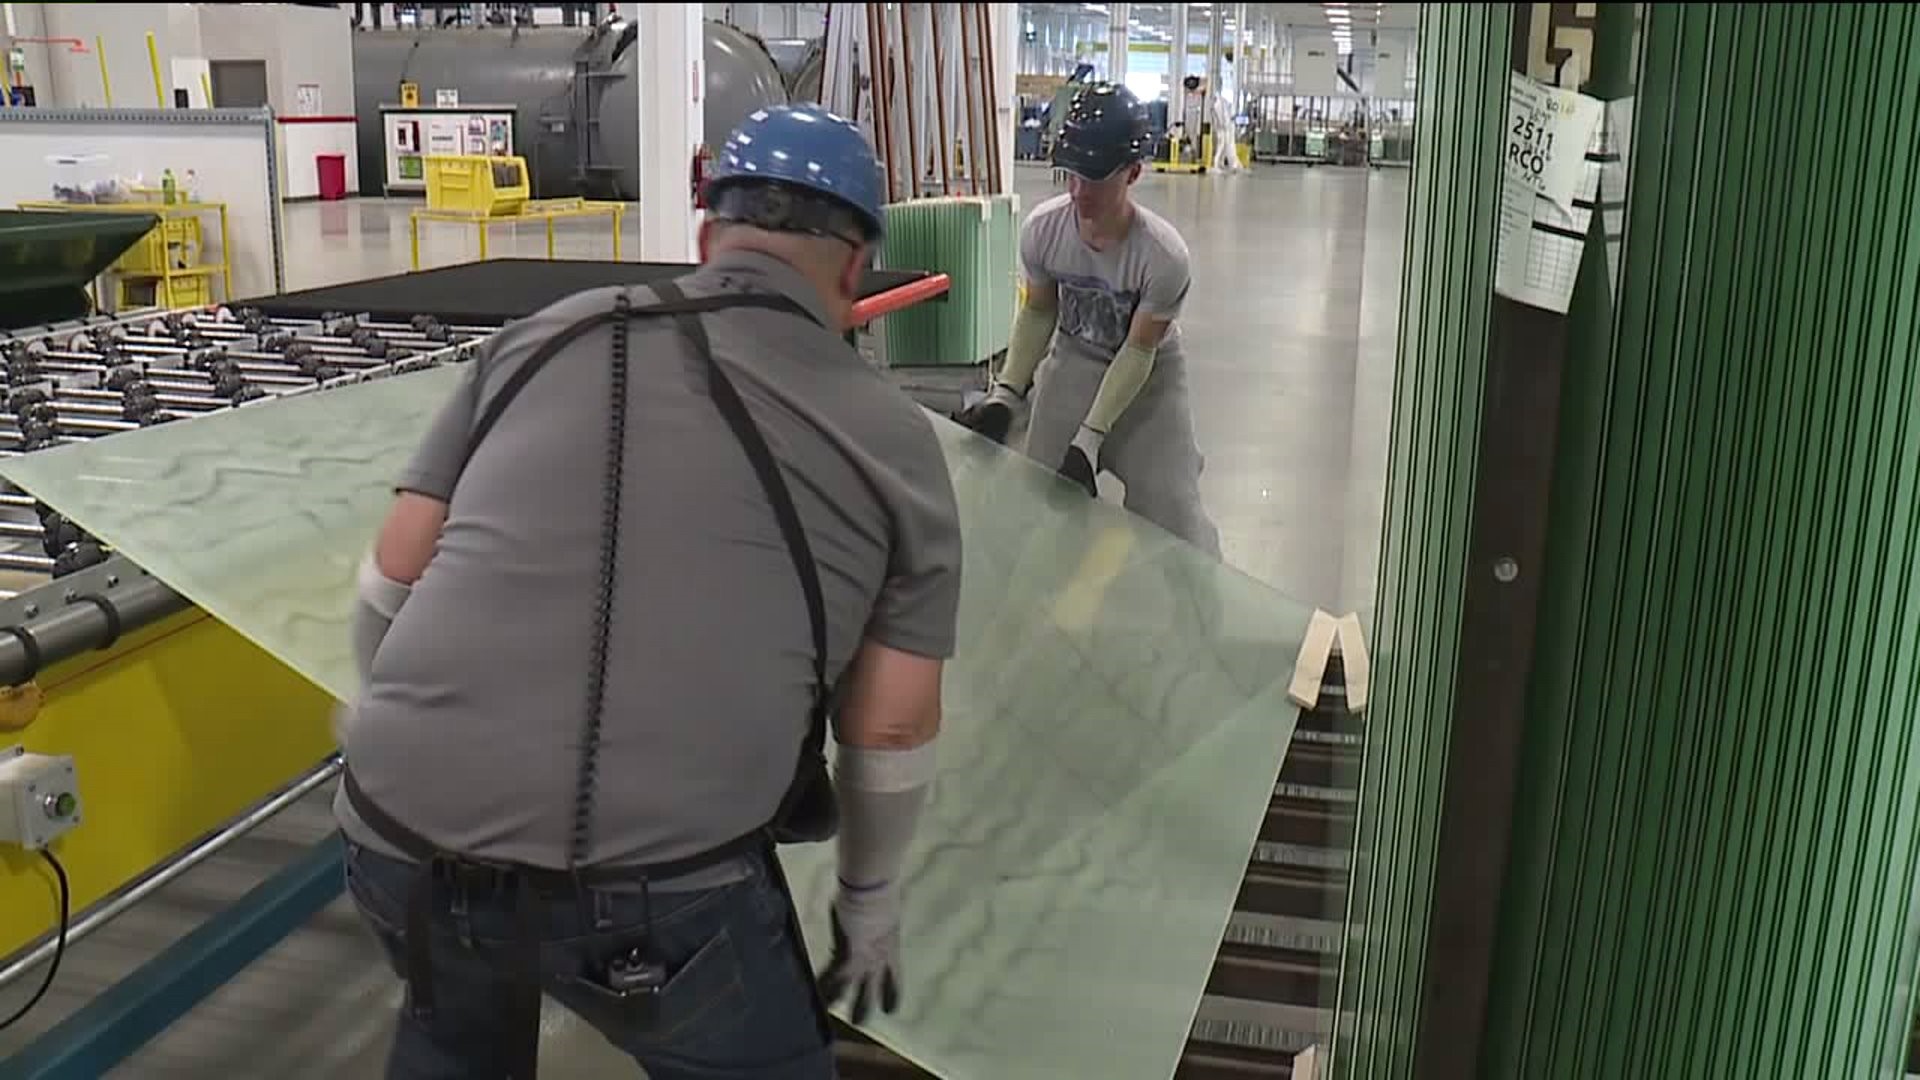 Window of Opportunity: Glass Manufacturer Looking to Expand